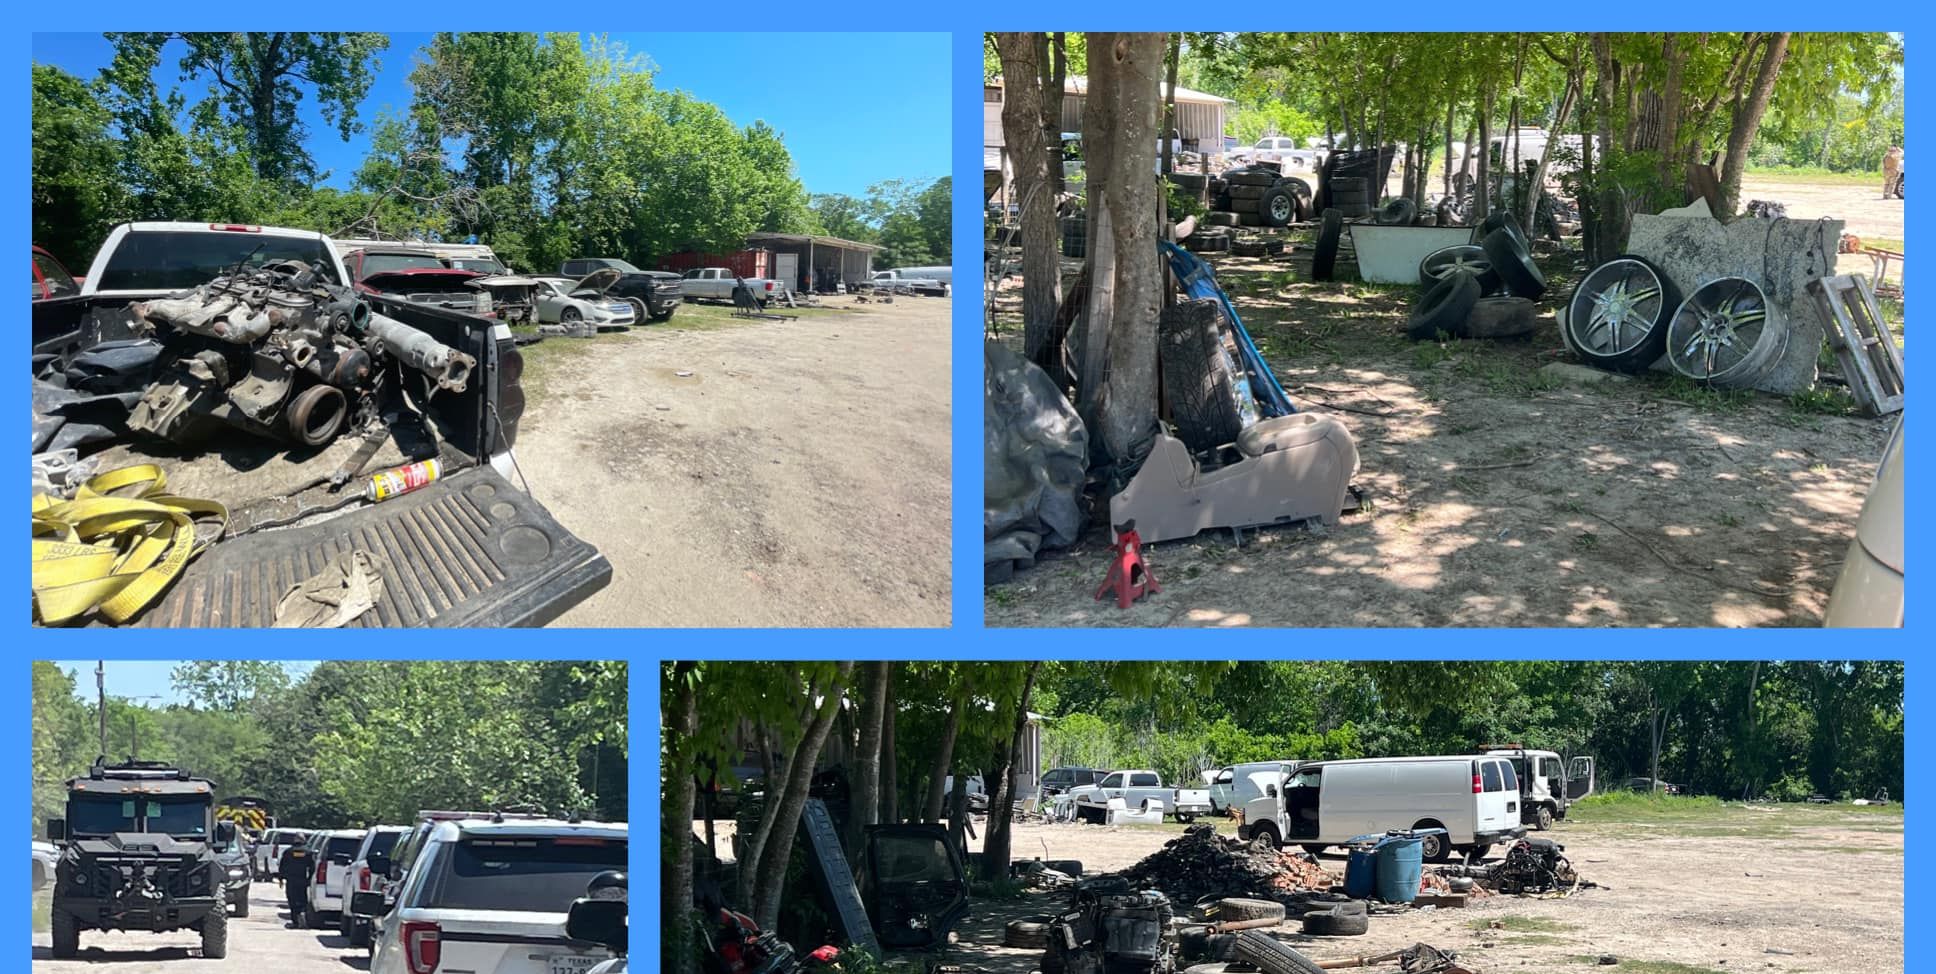 $1 Million Worth of Stolen Vehicles Recovered in Texas 'Chop-Shop' Bust, 3 Arrested